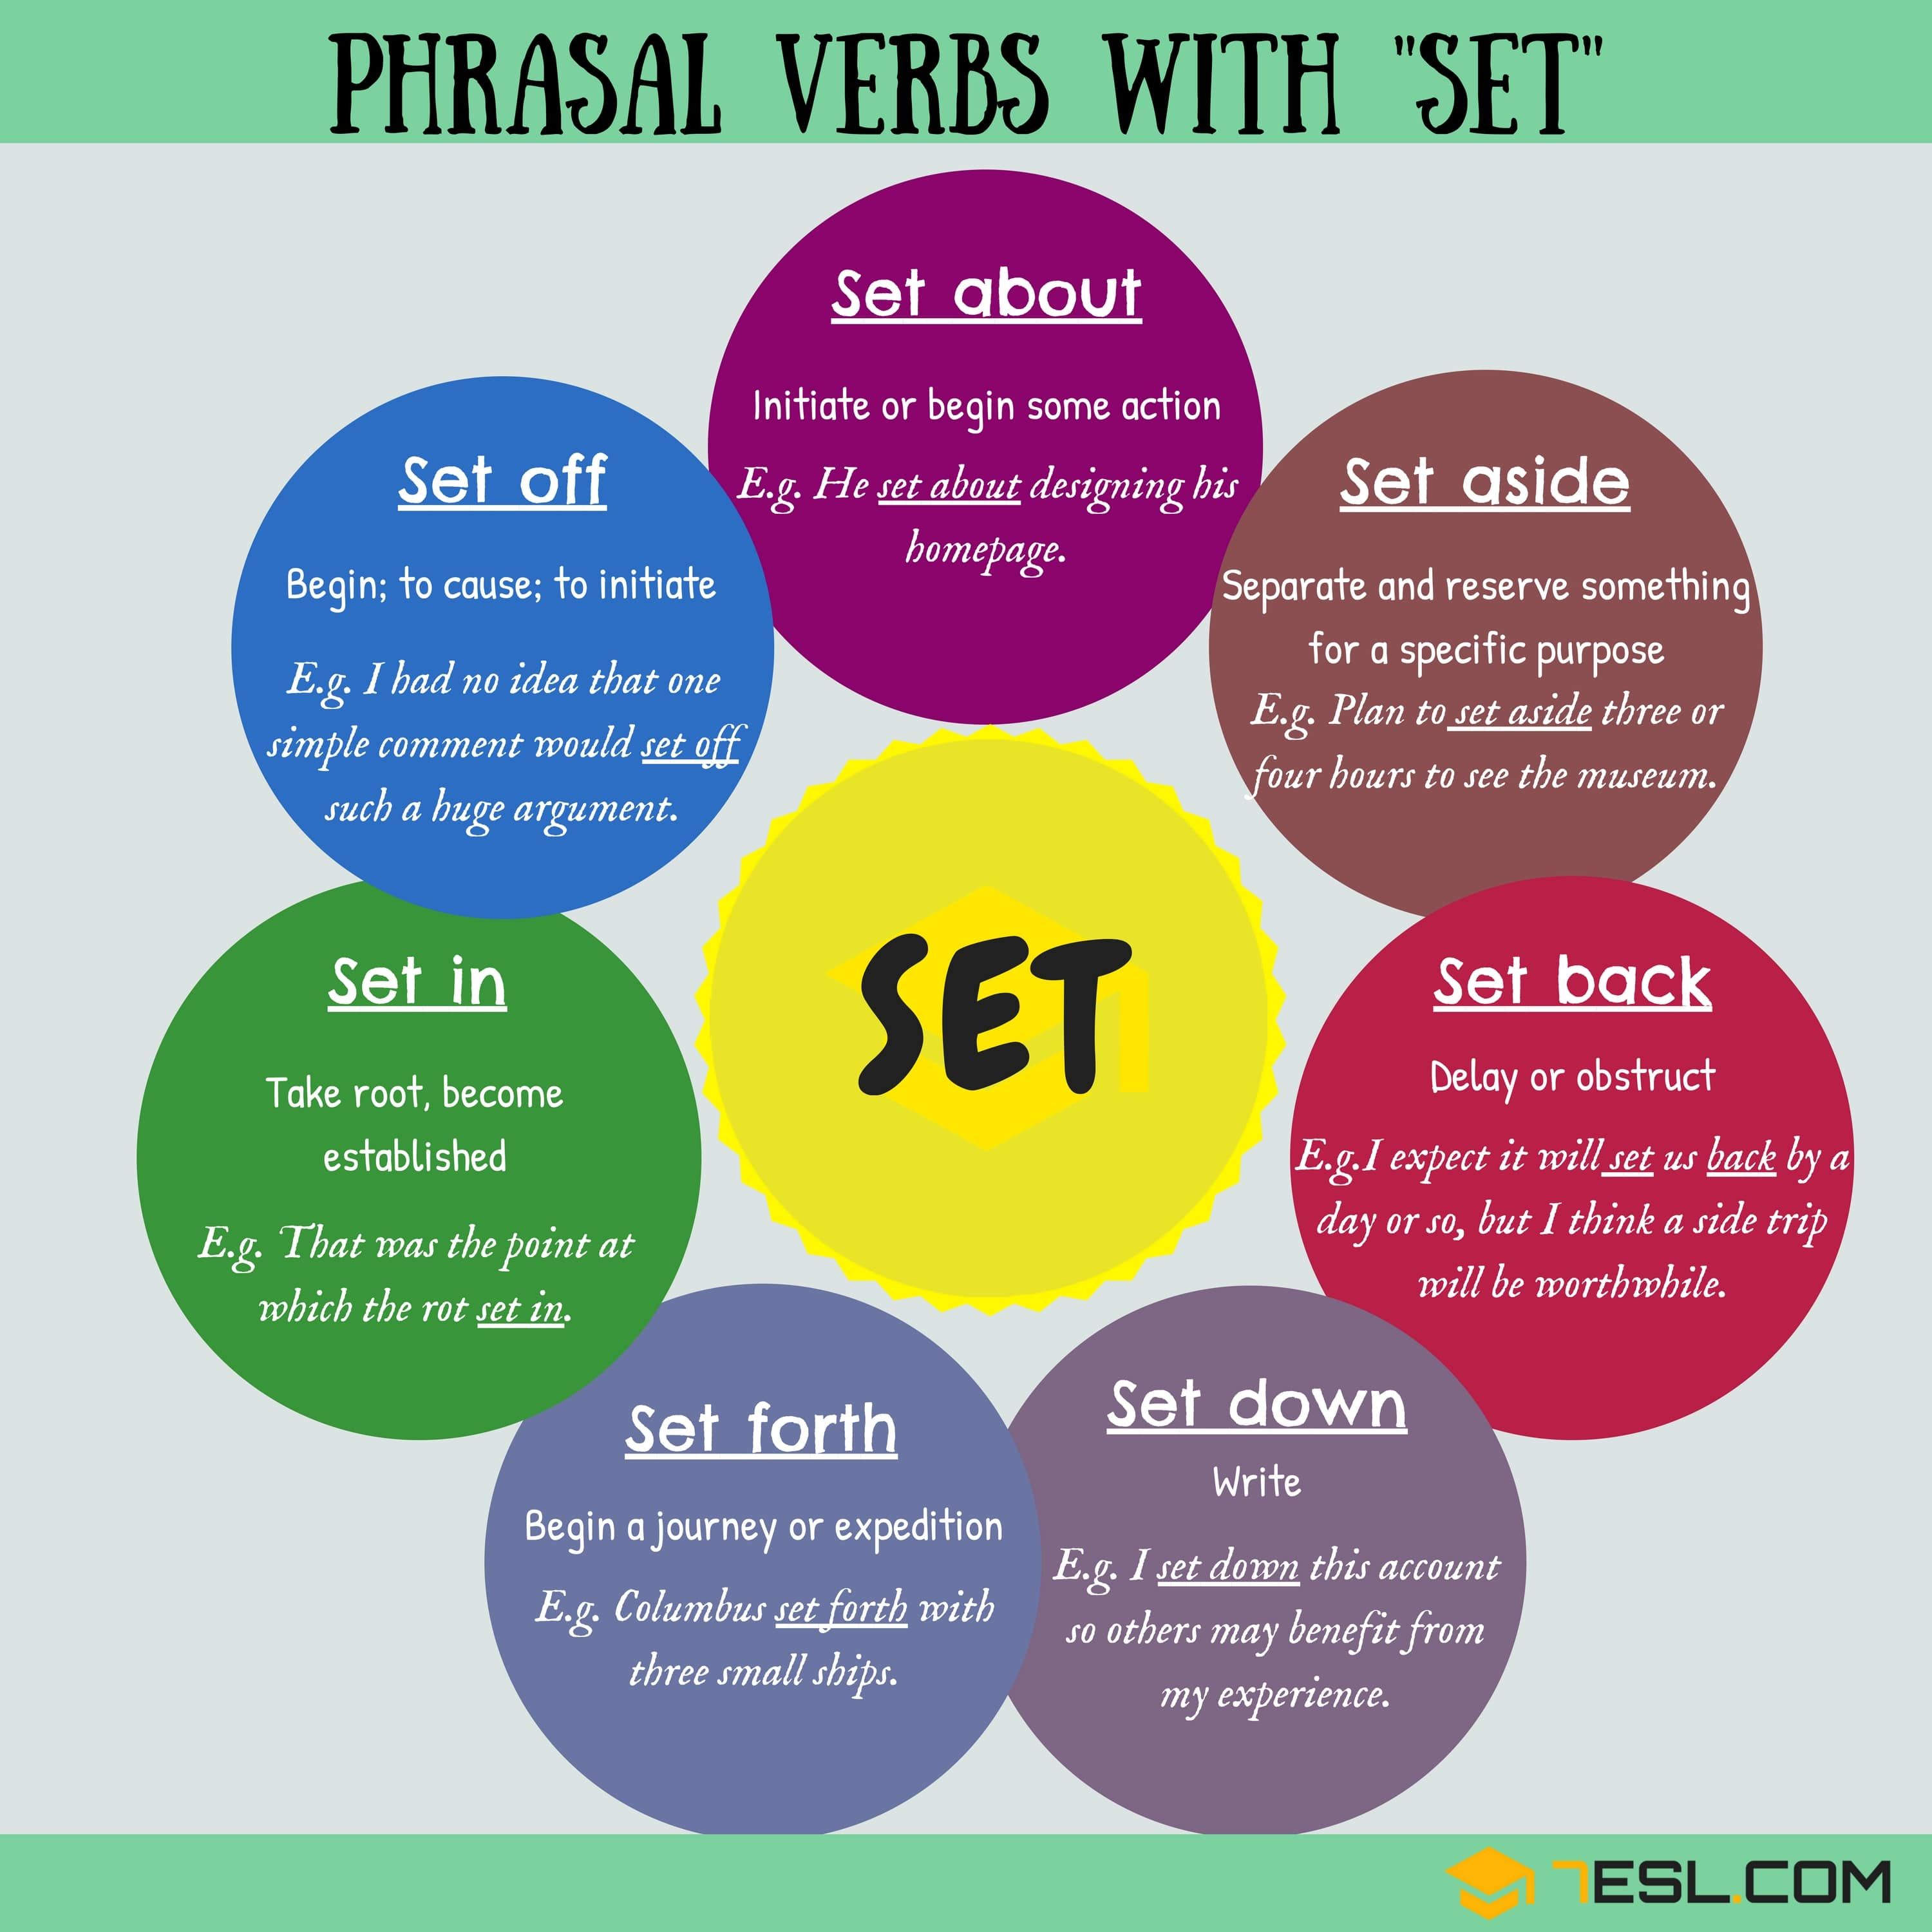 28 Commonly Used Phrasal Verbs with SET in English | English ...